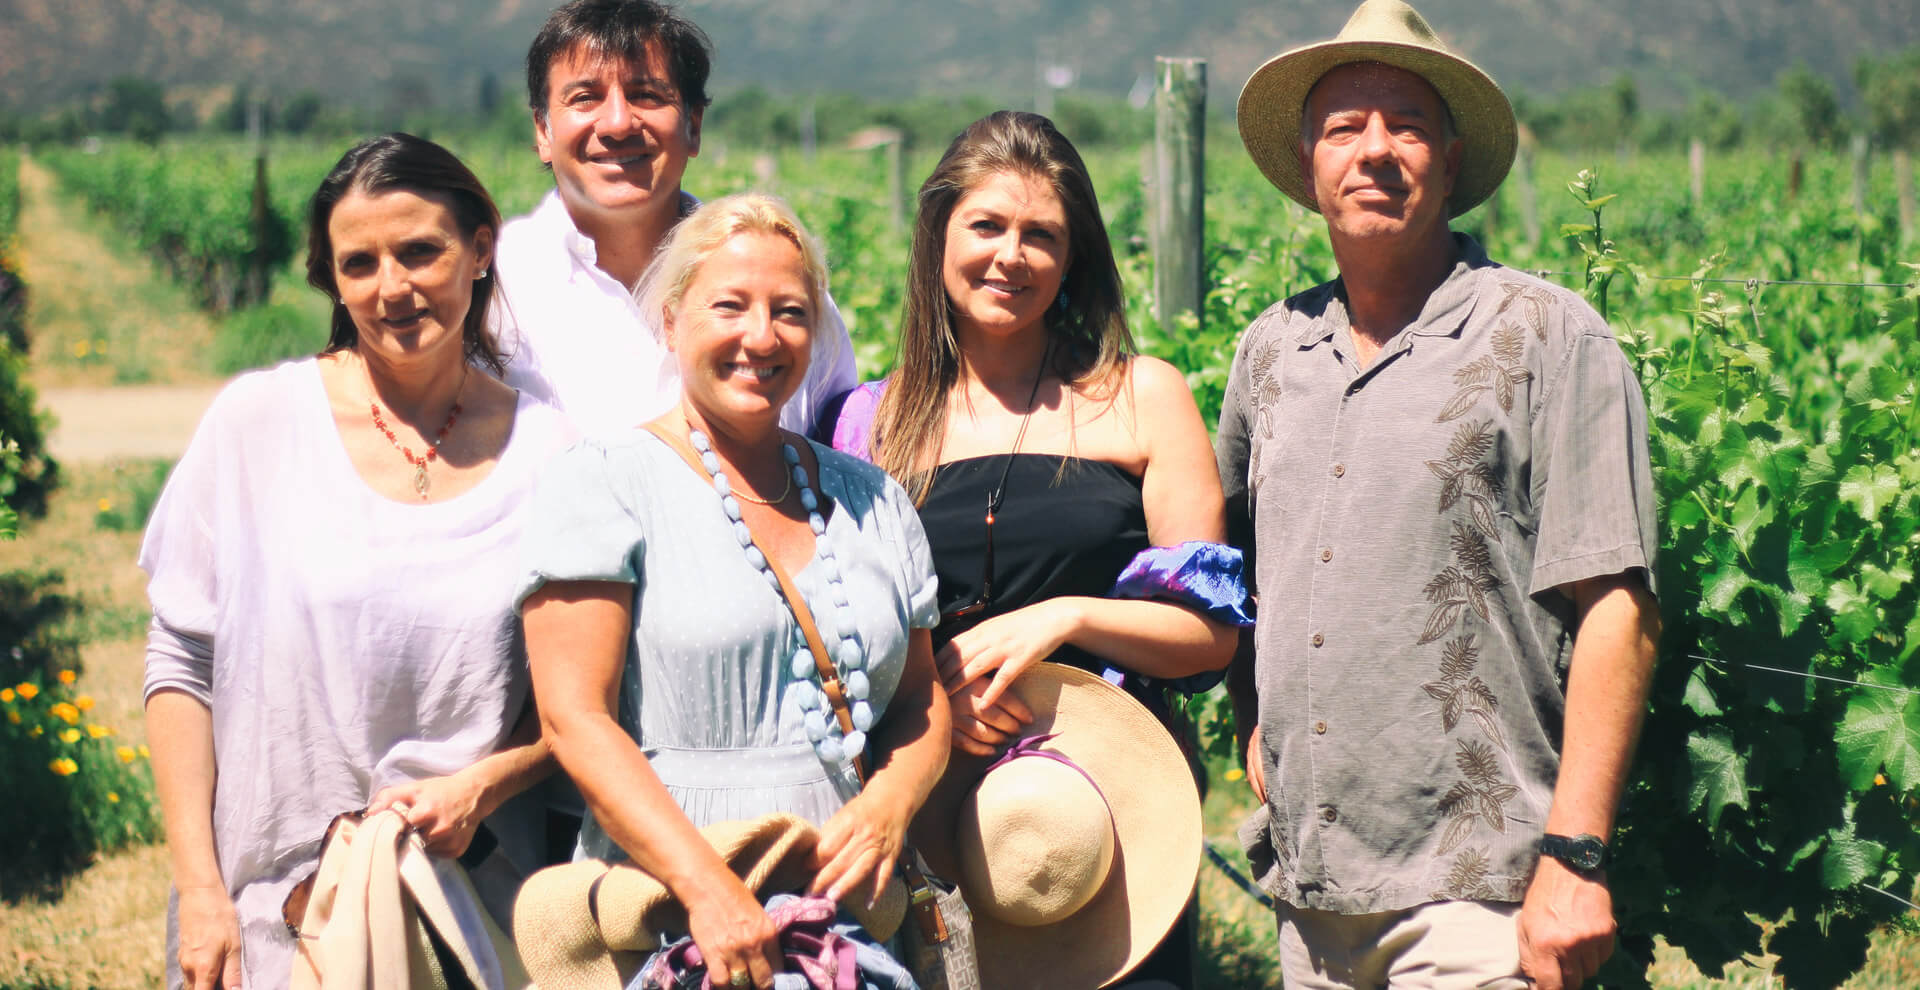 Argentina Experts on Wine Tours